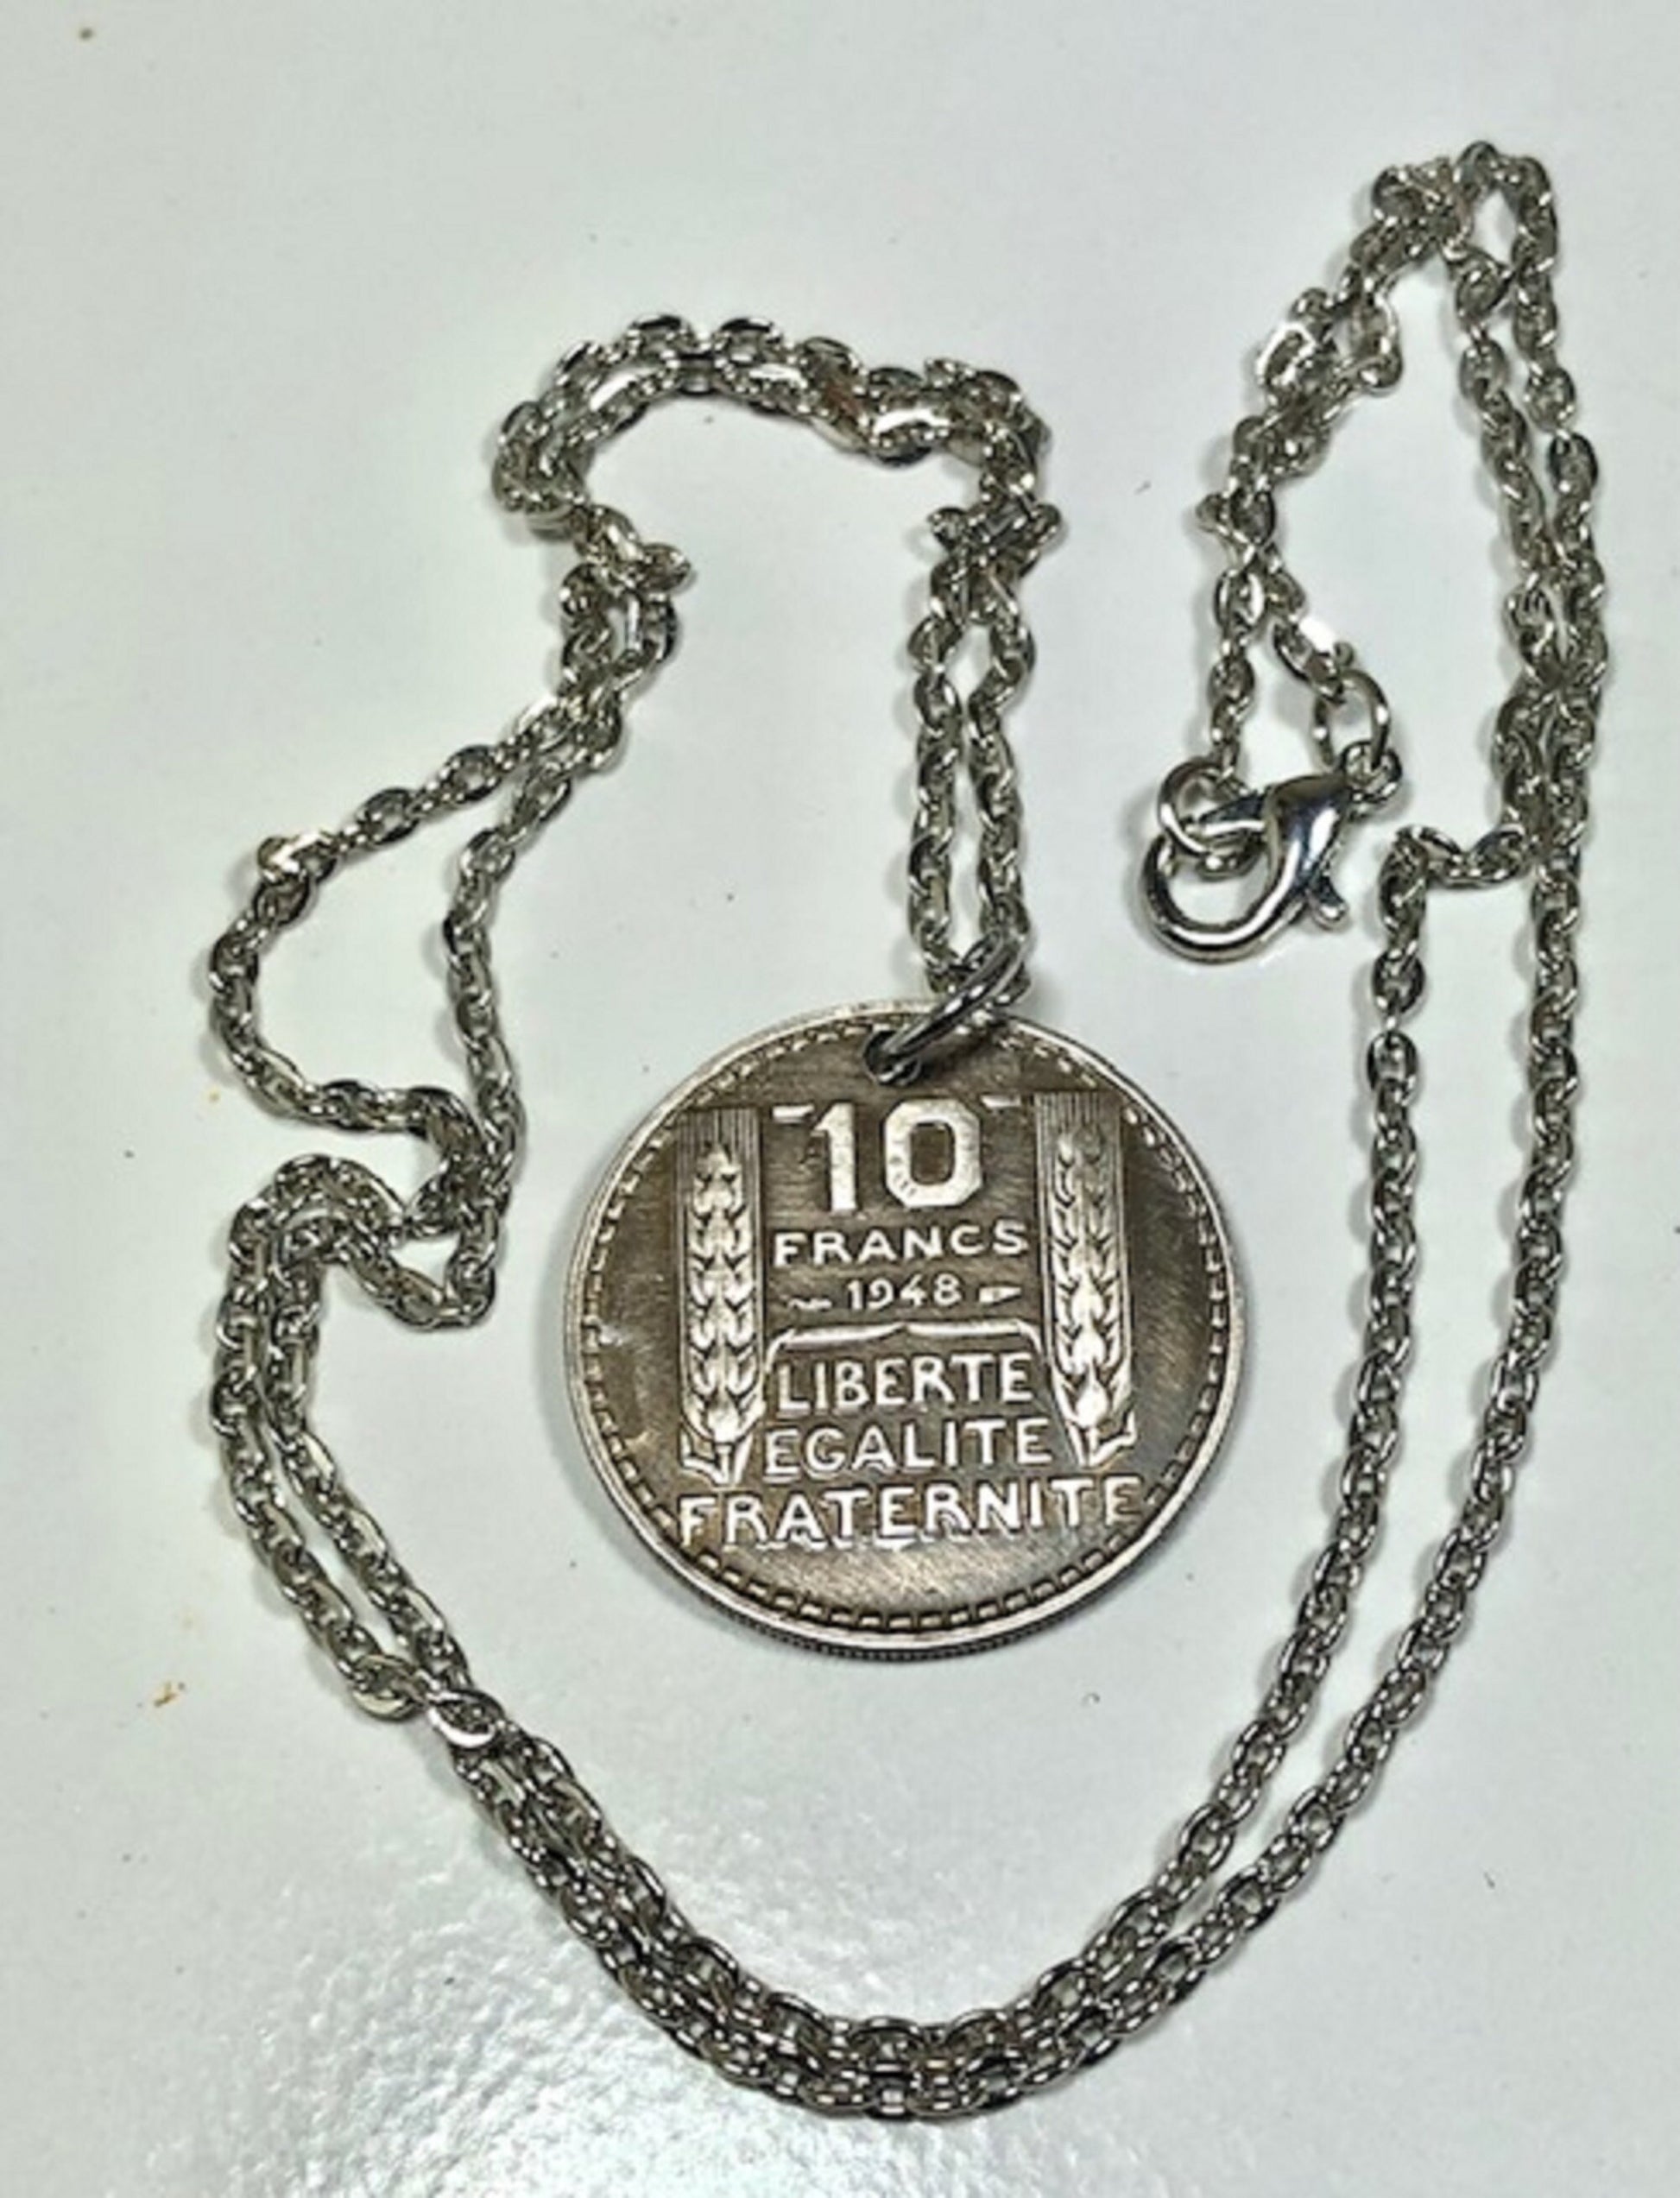 France Coin Pendant French 10 Franc Liberte Egalite Fraternite Personal Necklace Jewelry Gift Friend Charm For Him Her World Coin Collector